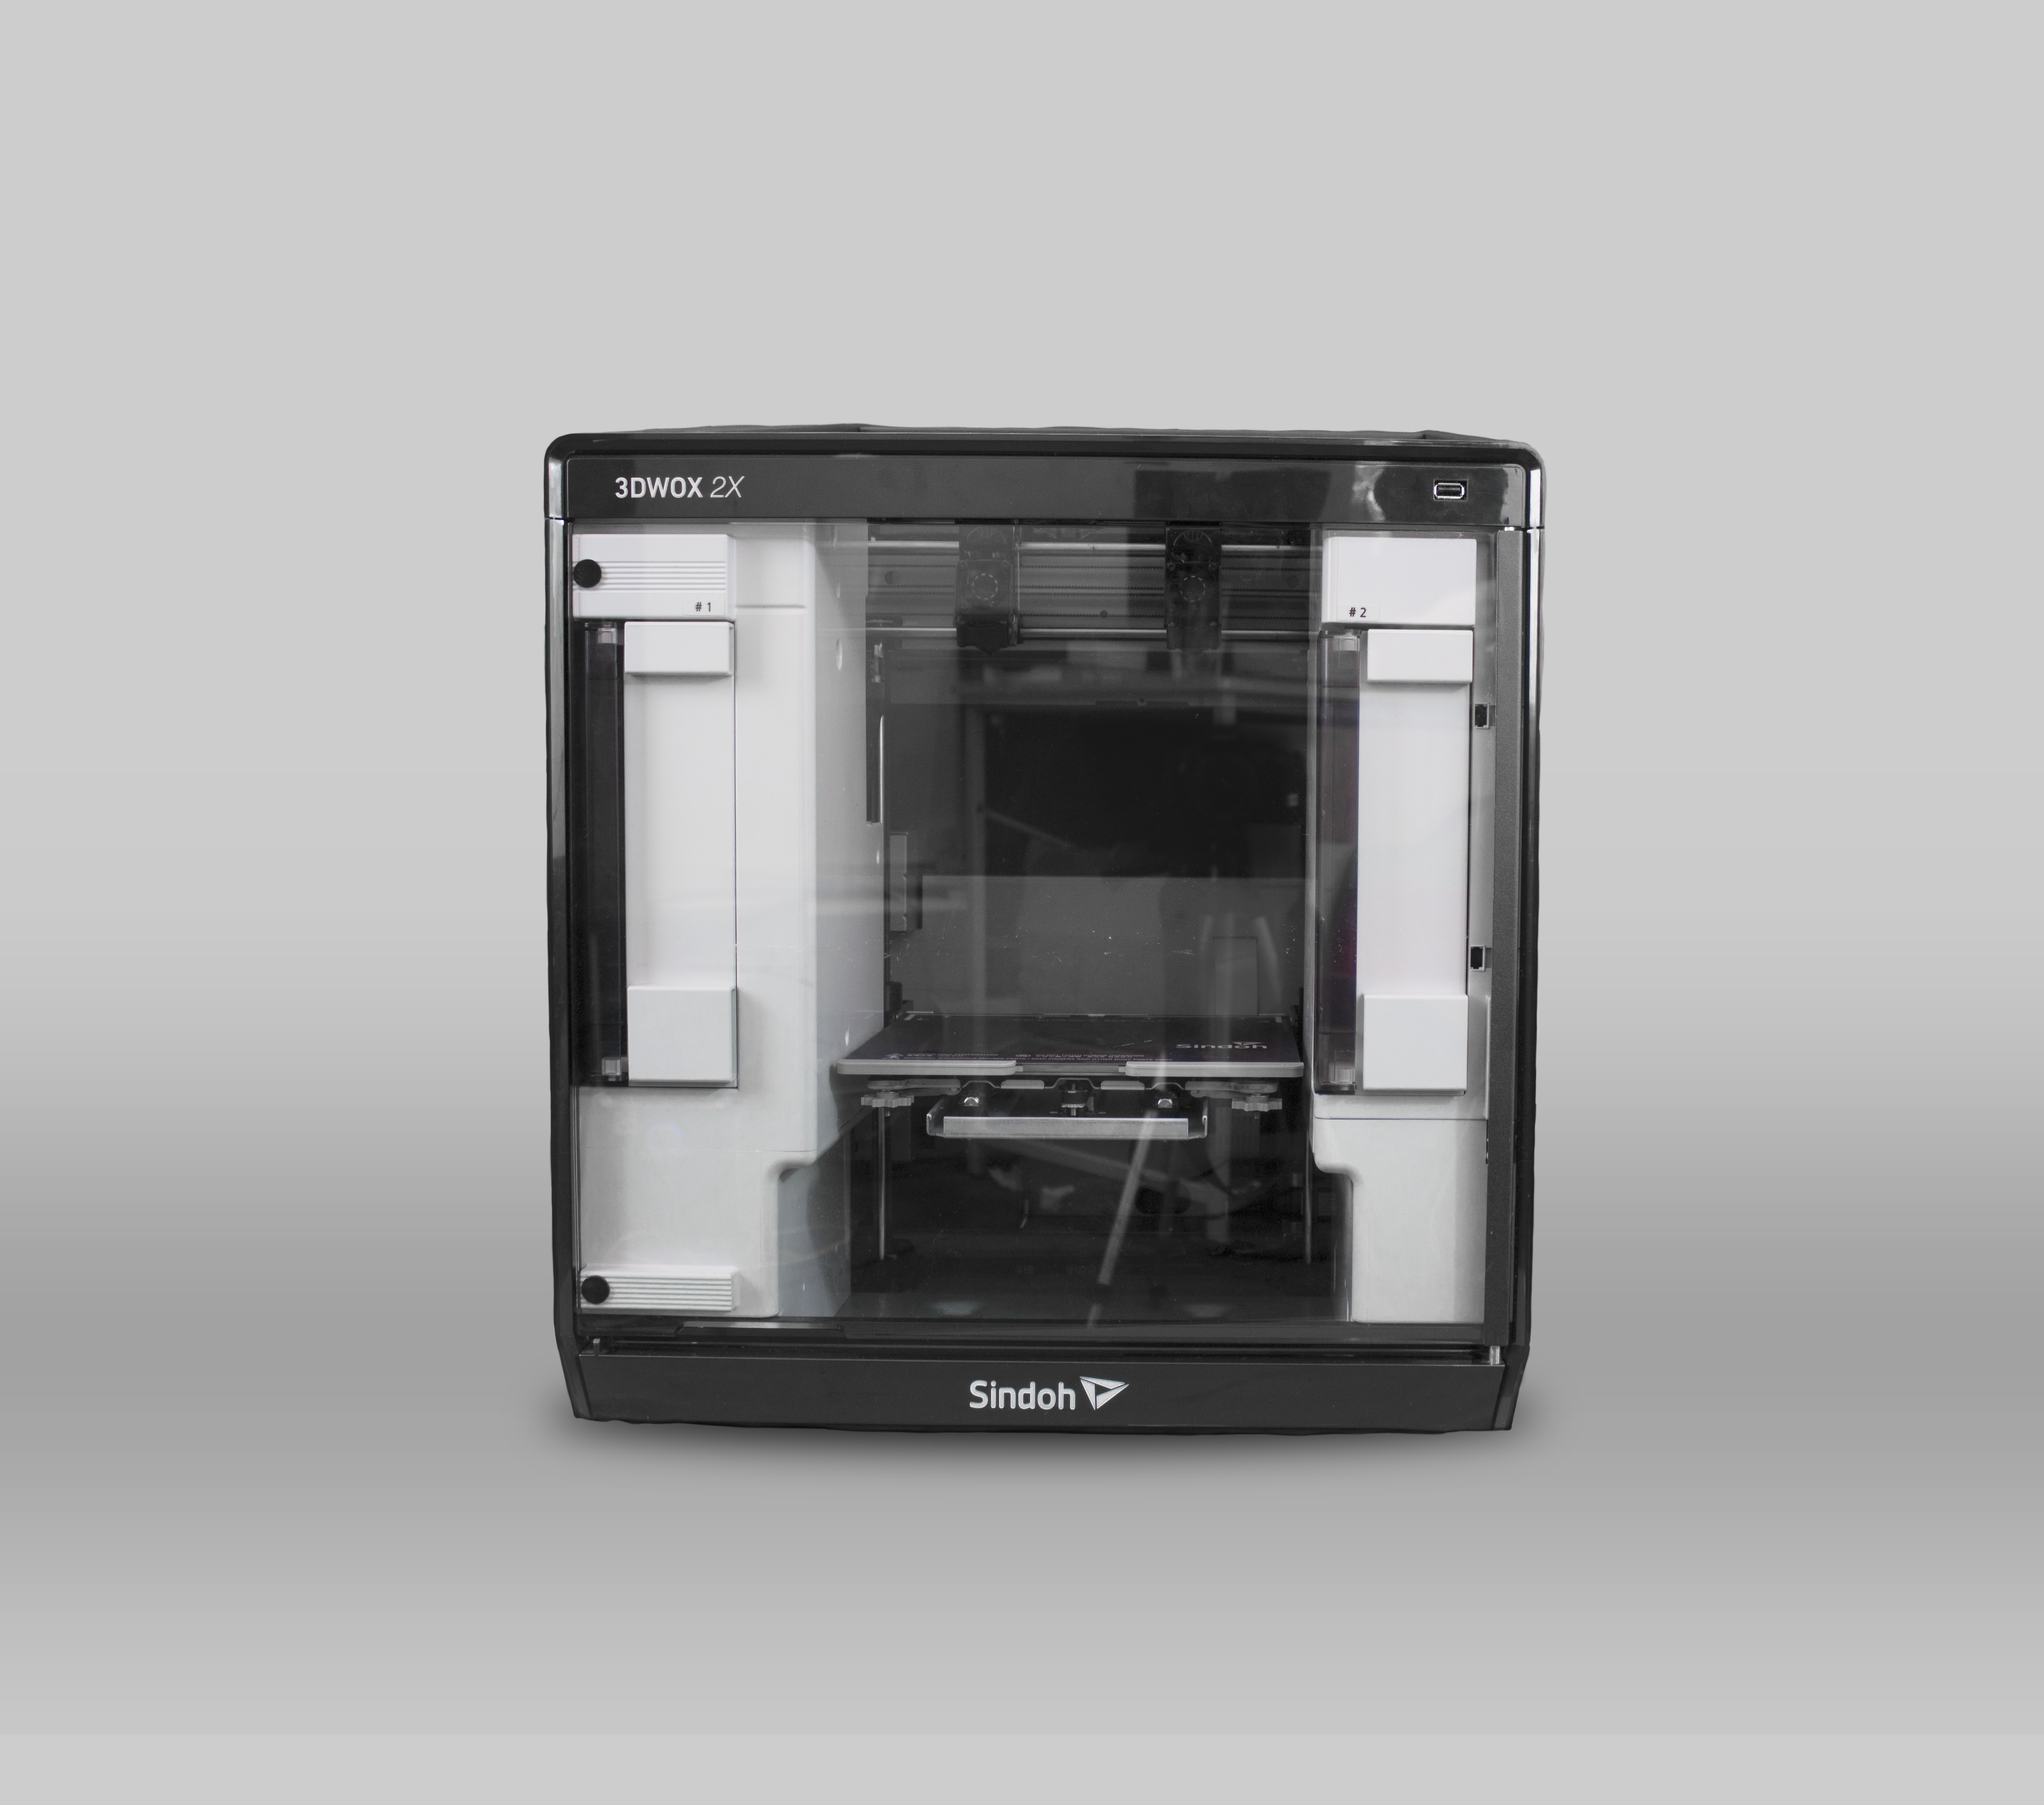 REVIEW: The Sindoh 3DWOX 2X, an accurate, user-friendly dual extrusion printer - Printing Industry